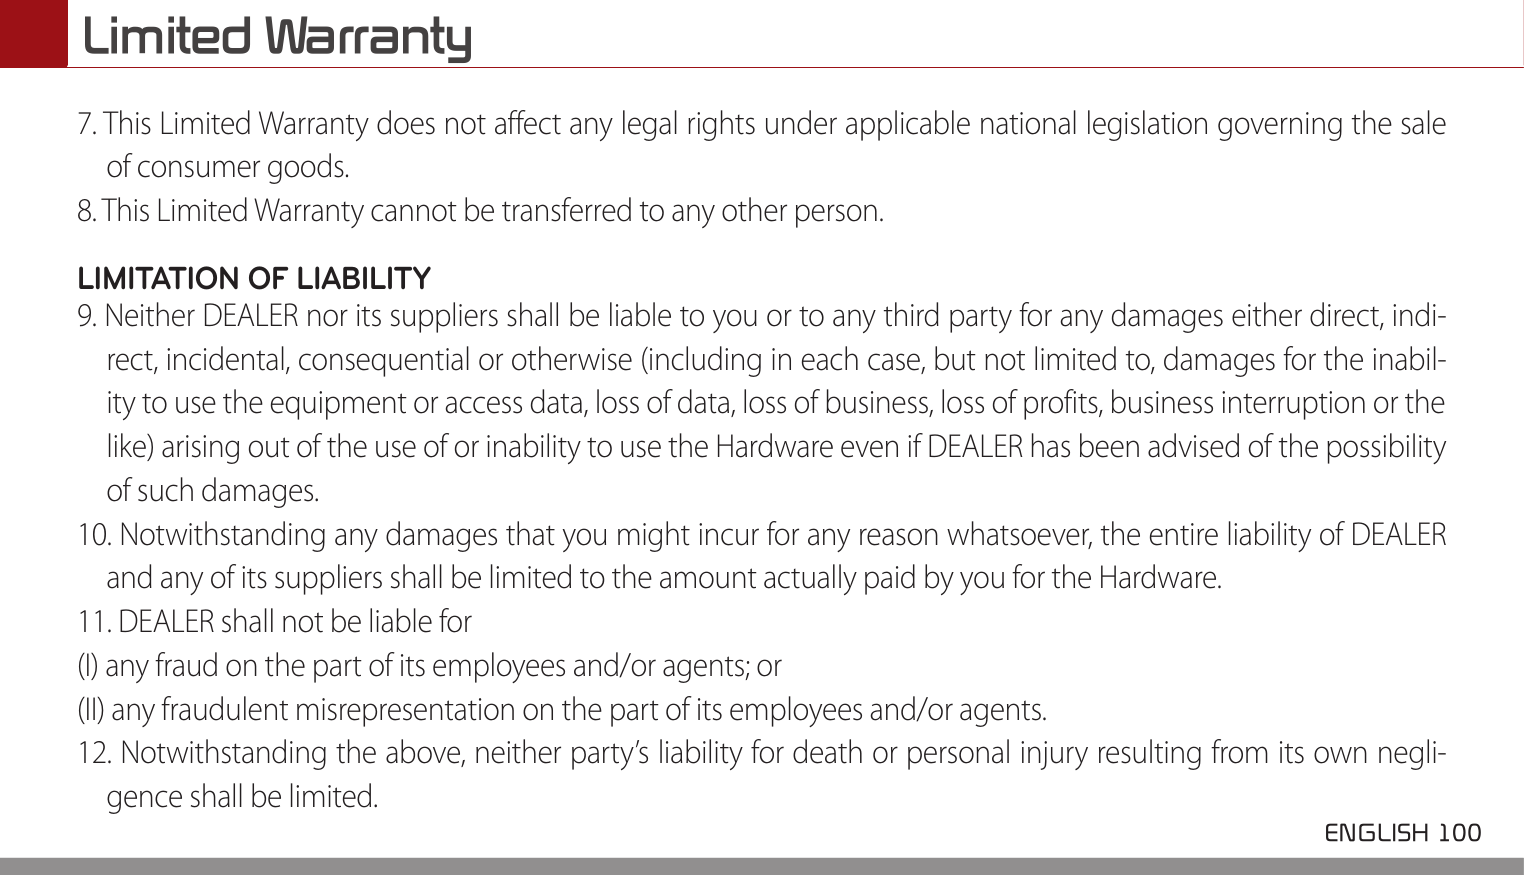 Limited Warranty ENGLISH 100 7. This Limited Warranty does not affect any legal rights under applicable national legislation governing the saleof consumer goods.8. This Limited Warranty cannot be transferred to any other person.LIMITATION OF LIABILITY9. Neither DEALER nor its suppliers shall be liable to you or to any third party for any damages either direct, indi-rect, incidental, consequential or otherwise (including in each case, but not limited to, damages for the inabil-ity to use the equipment or access data, loss of data, loss of business, loss of profits, business interruption or thelike) arising out of the use of or inability to use the Hardware even if DEALER has been advised of the possibilityof such damages.10. Notwithstanding any damages that you might incur for any reason whatsoever, the entire liability of DEALERand any of its suppliers shall be limited to the amount actually paid by you for the Hardware.11. DEALER shall not be liable for(I) any fraud on the part of its employees and/or agents; or(II) any fraudulent misrepresentation on the part of its employees and/or agents.12. Notwithstanding the above, neither party’s liability for death or personal injury resulting from its own negli-gence shall be limited.